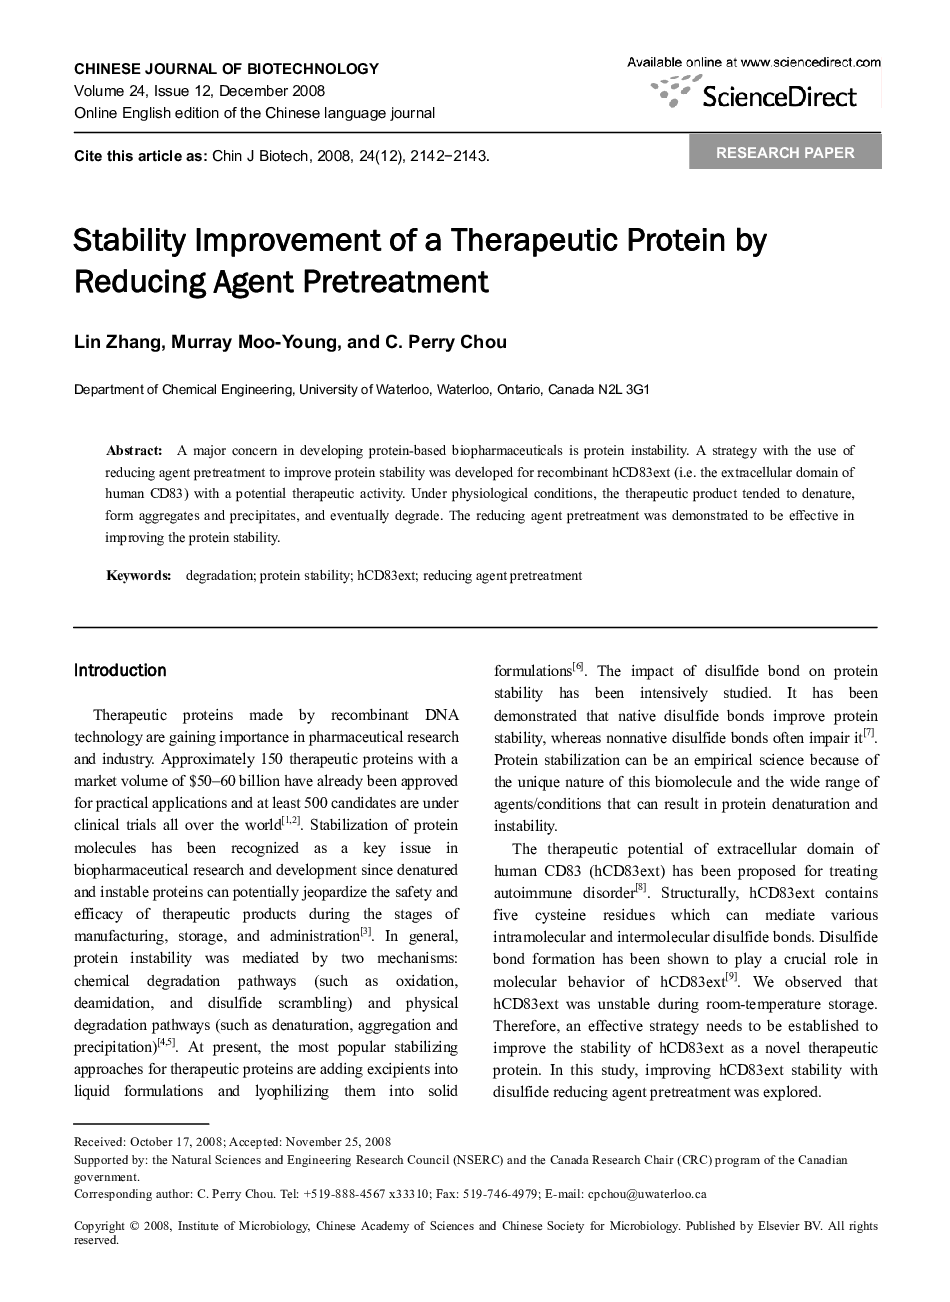 Stability Improvement of a Therapeutic Protein by Reducing Agent Pretreatment